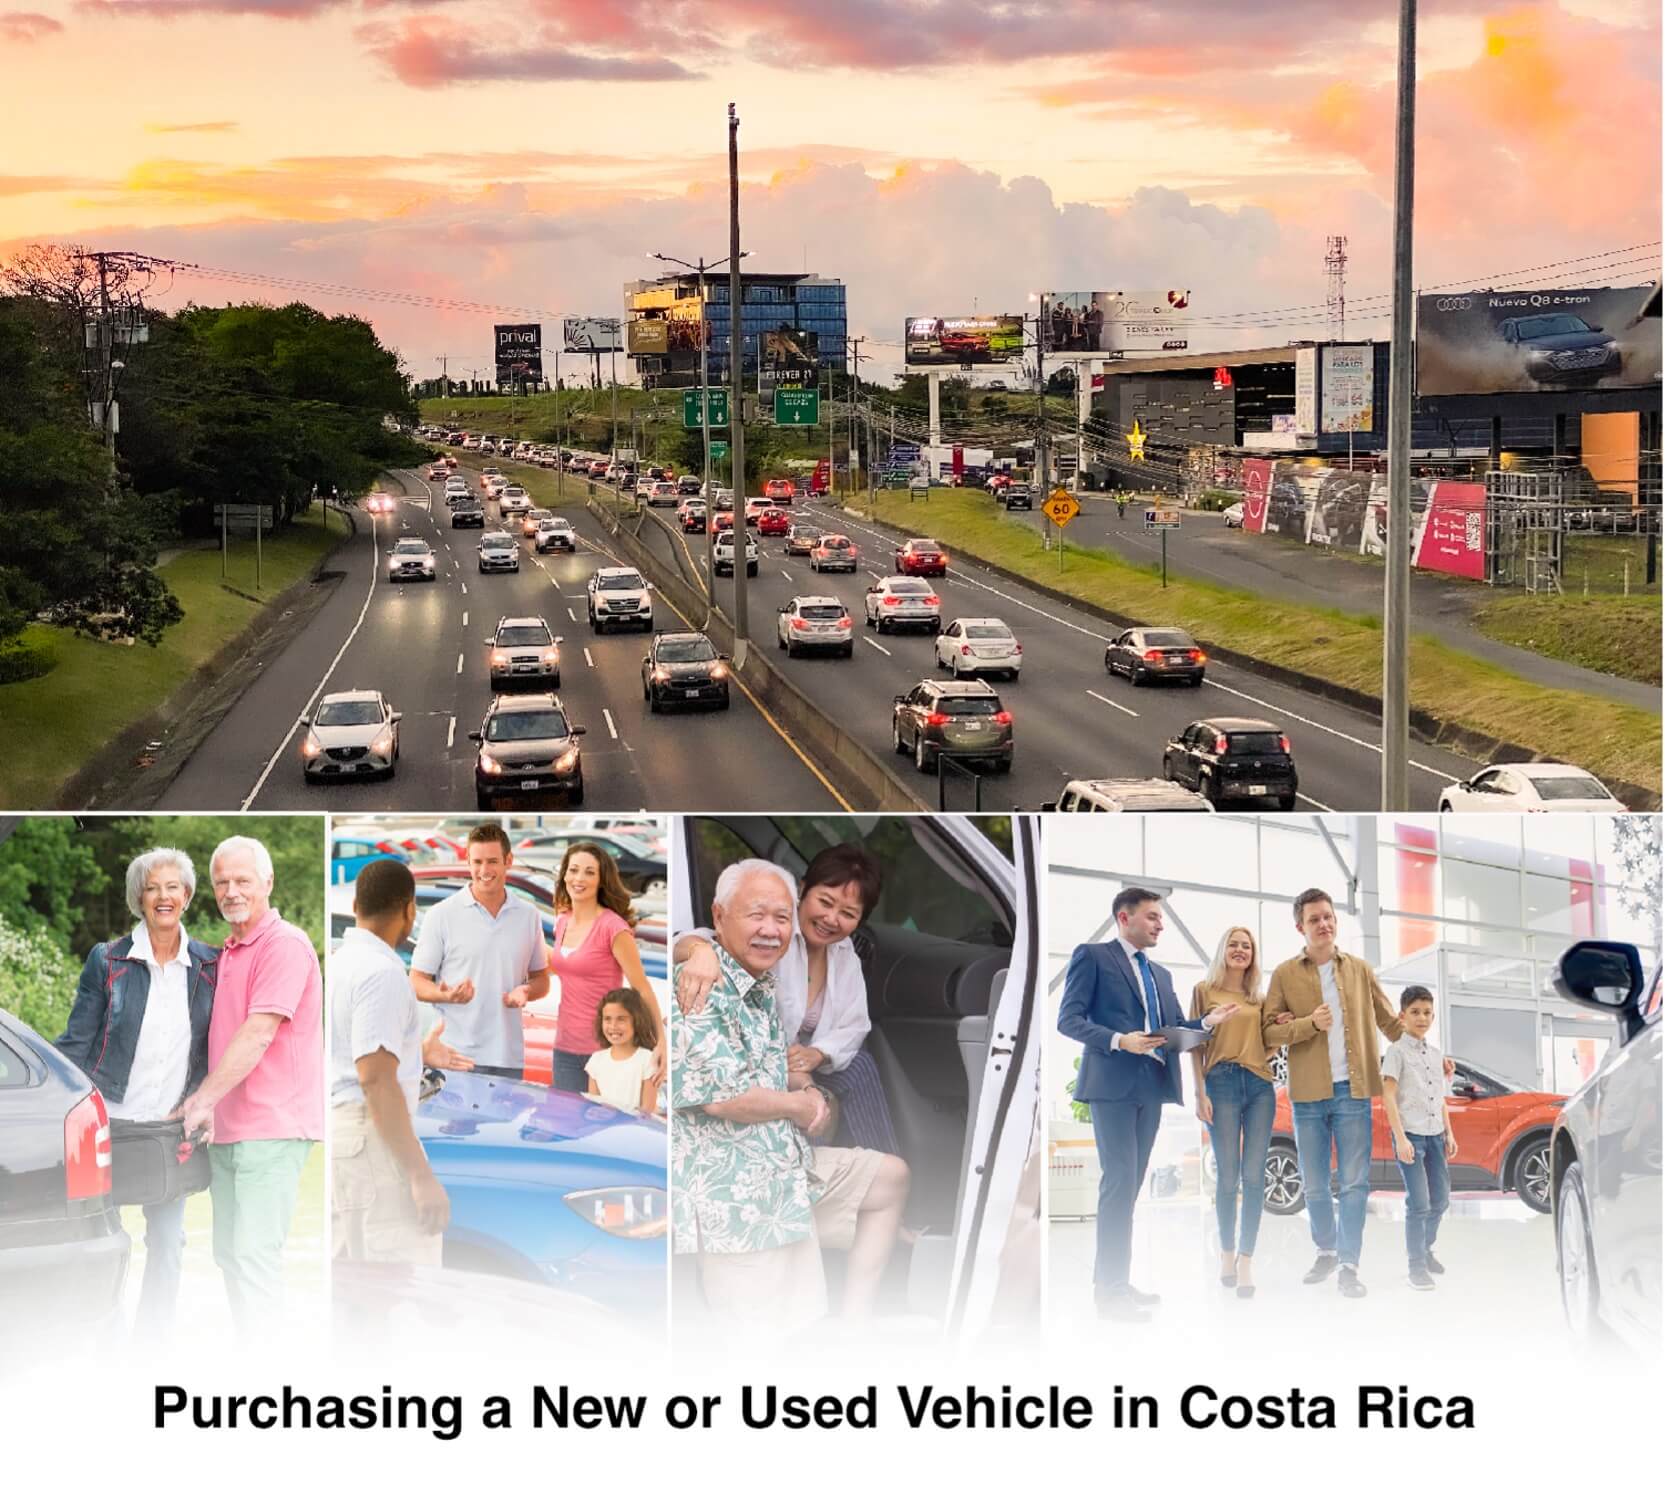 Image collage about purchasing a vehicle in Costa Rica